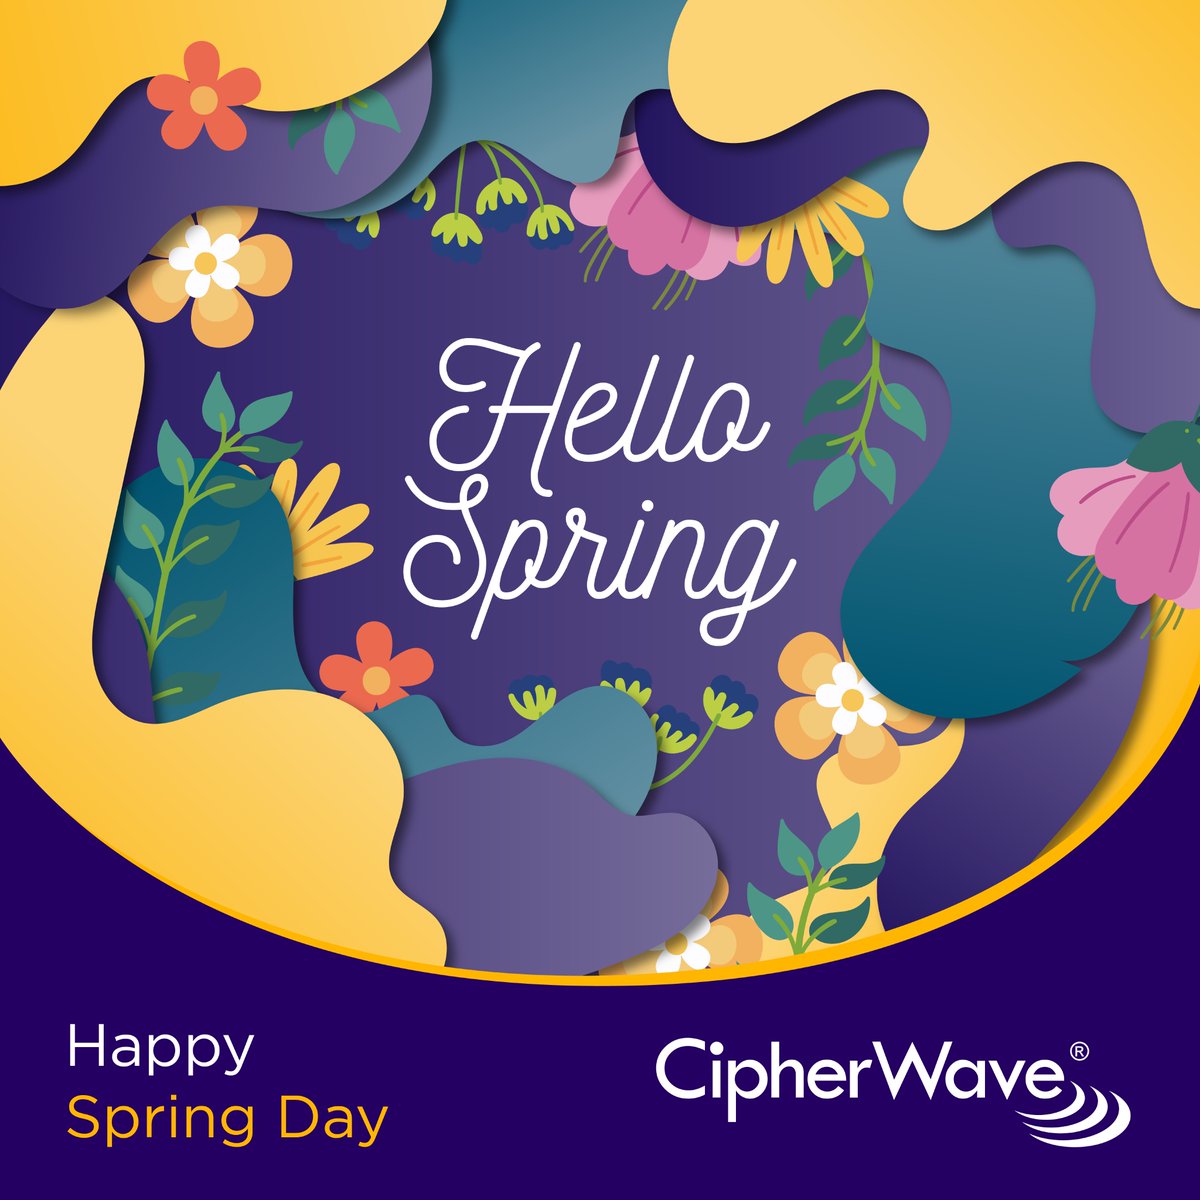 Embracing the Spring spirit 🌼🇿🇦

As we welcome the vibrant season of renewal, let's unite to create positive change.

#NewBeginnings #SpringInOurStep #SpringDaySA #TogetherWeThrive #BlossomingTogether #EmpoweringProgress #TechWithHeart #CipherWave #SouthAfricaRising